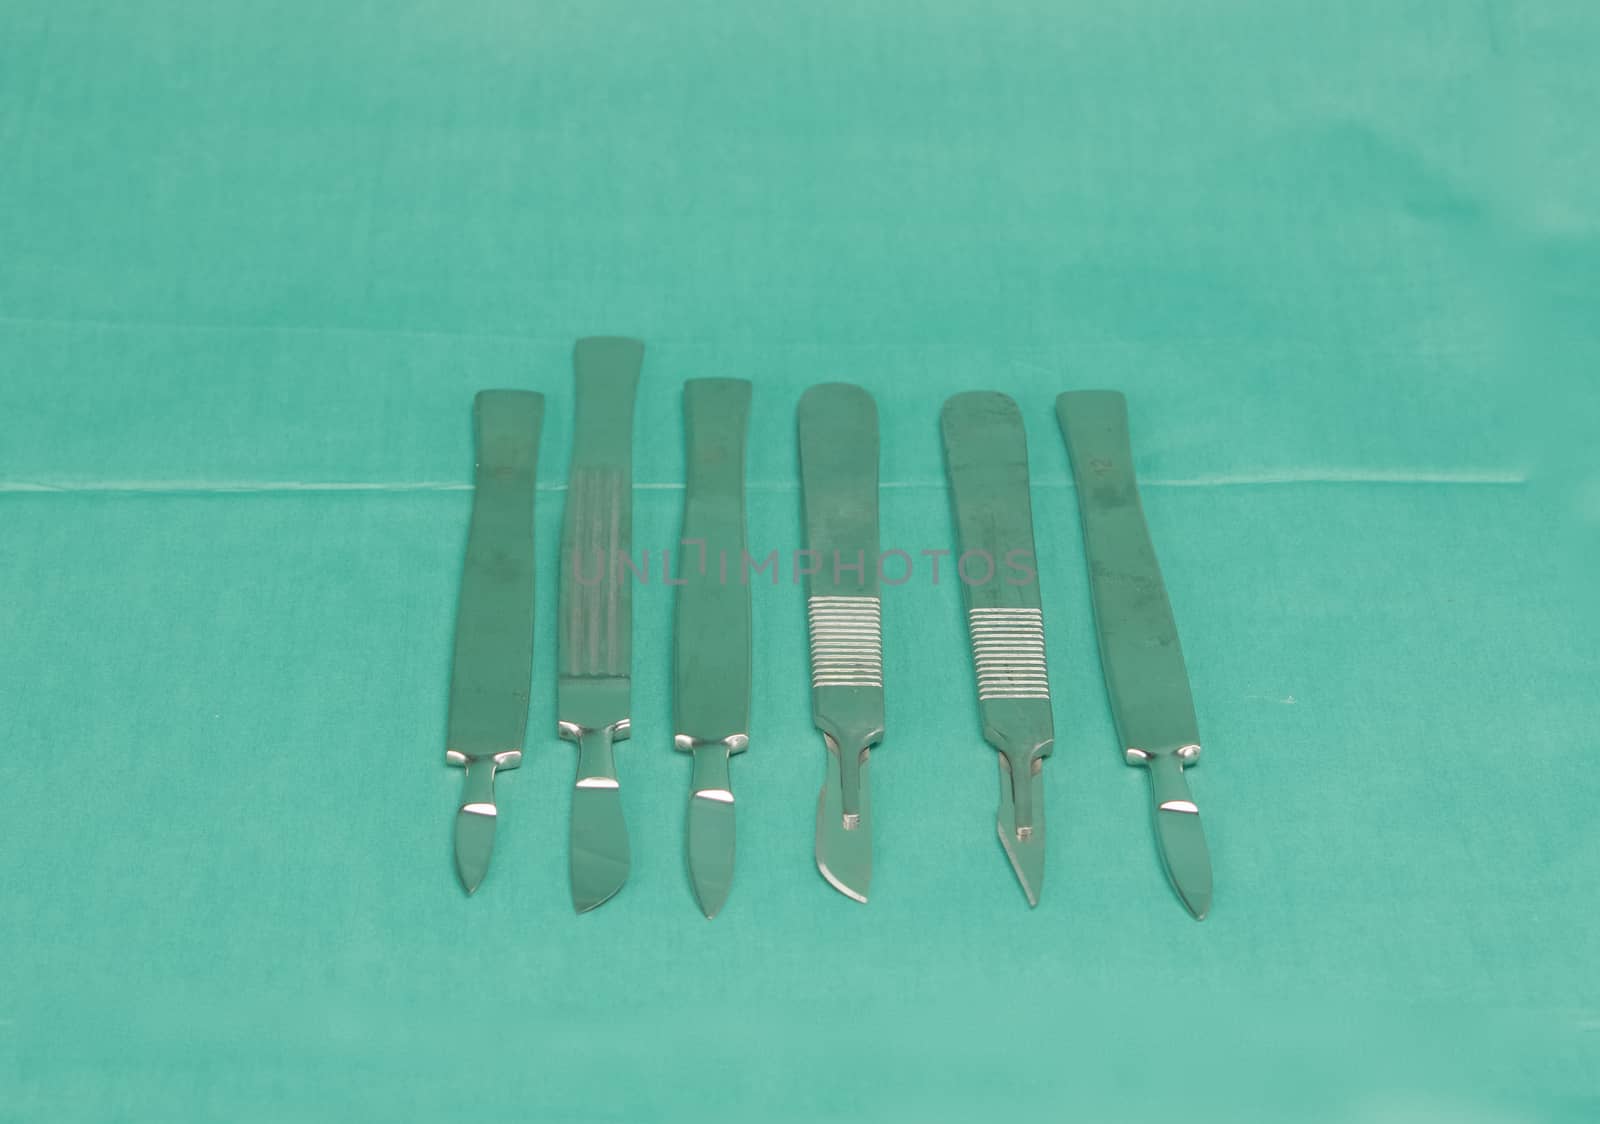 Many types of stainless scalpel were placed on green fabric.